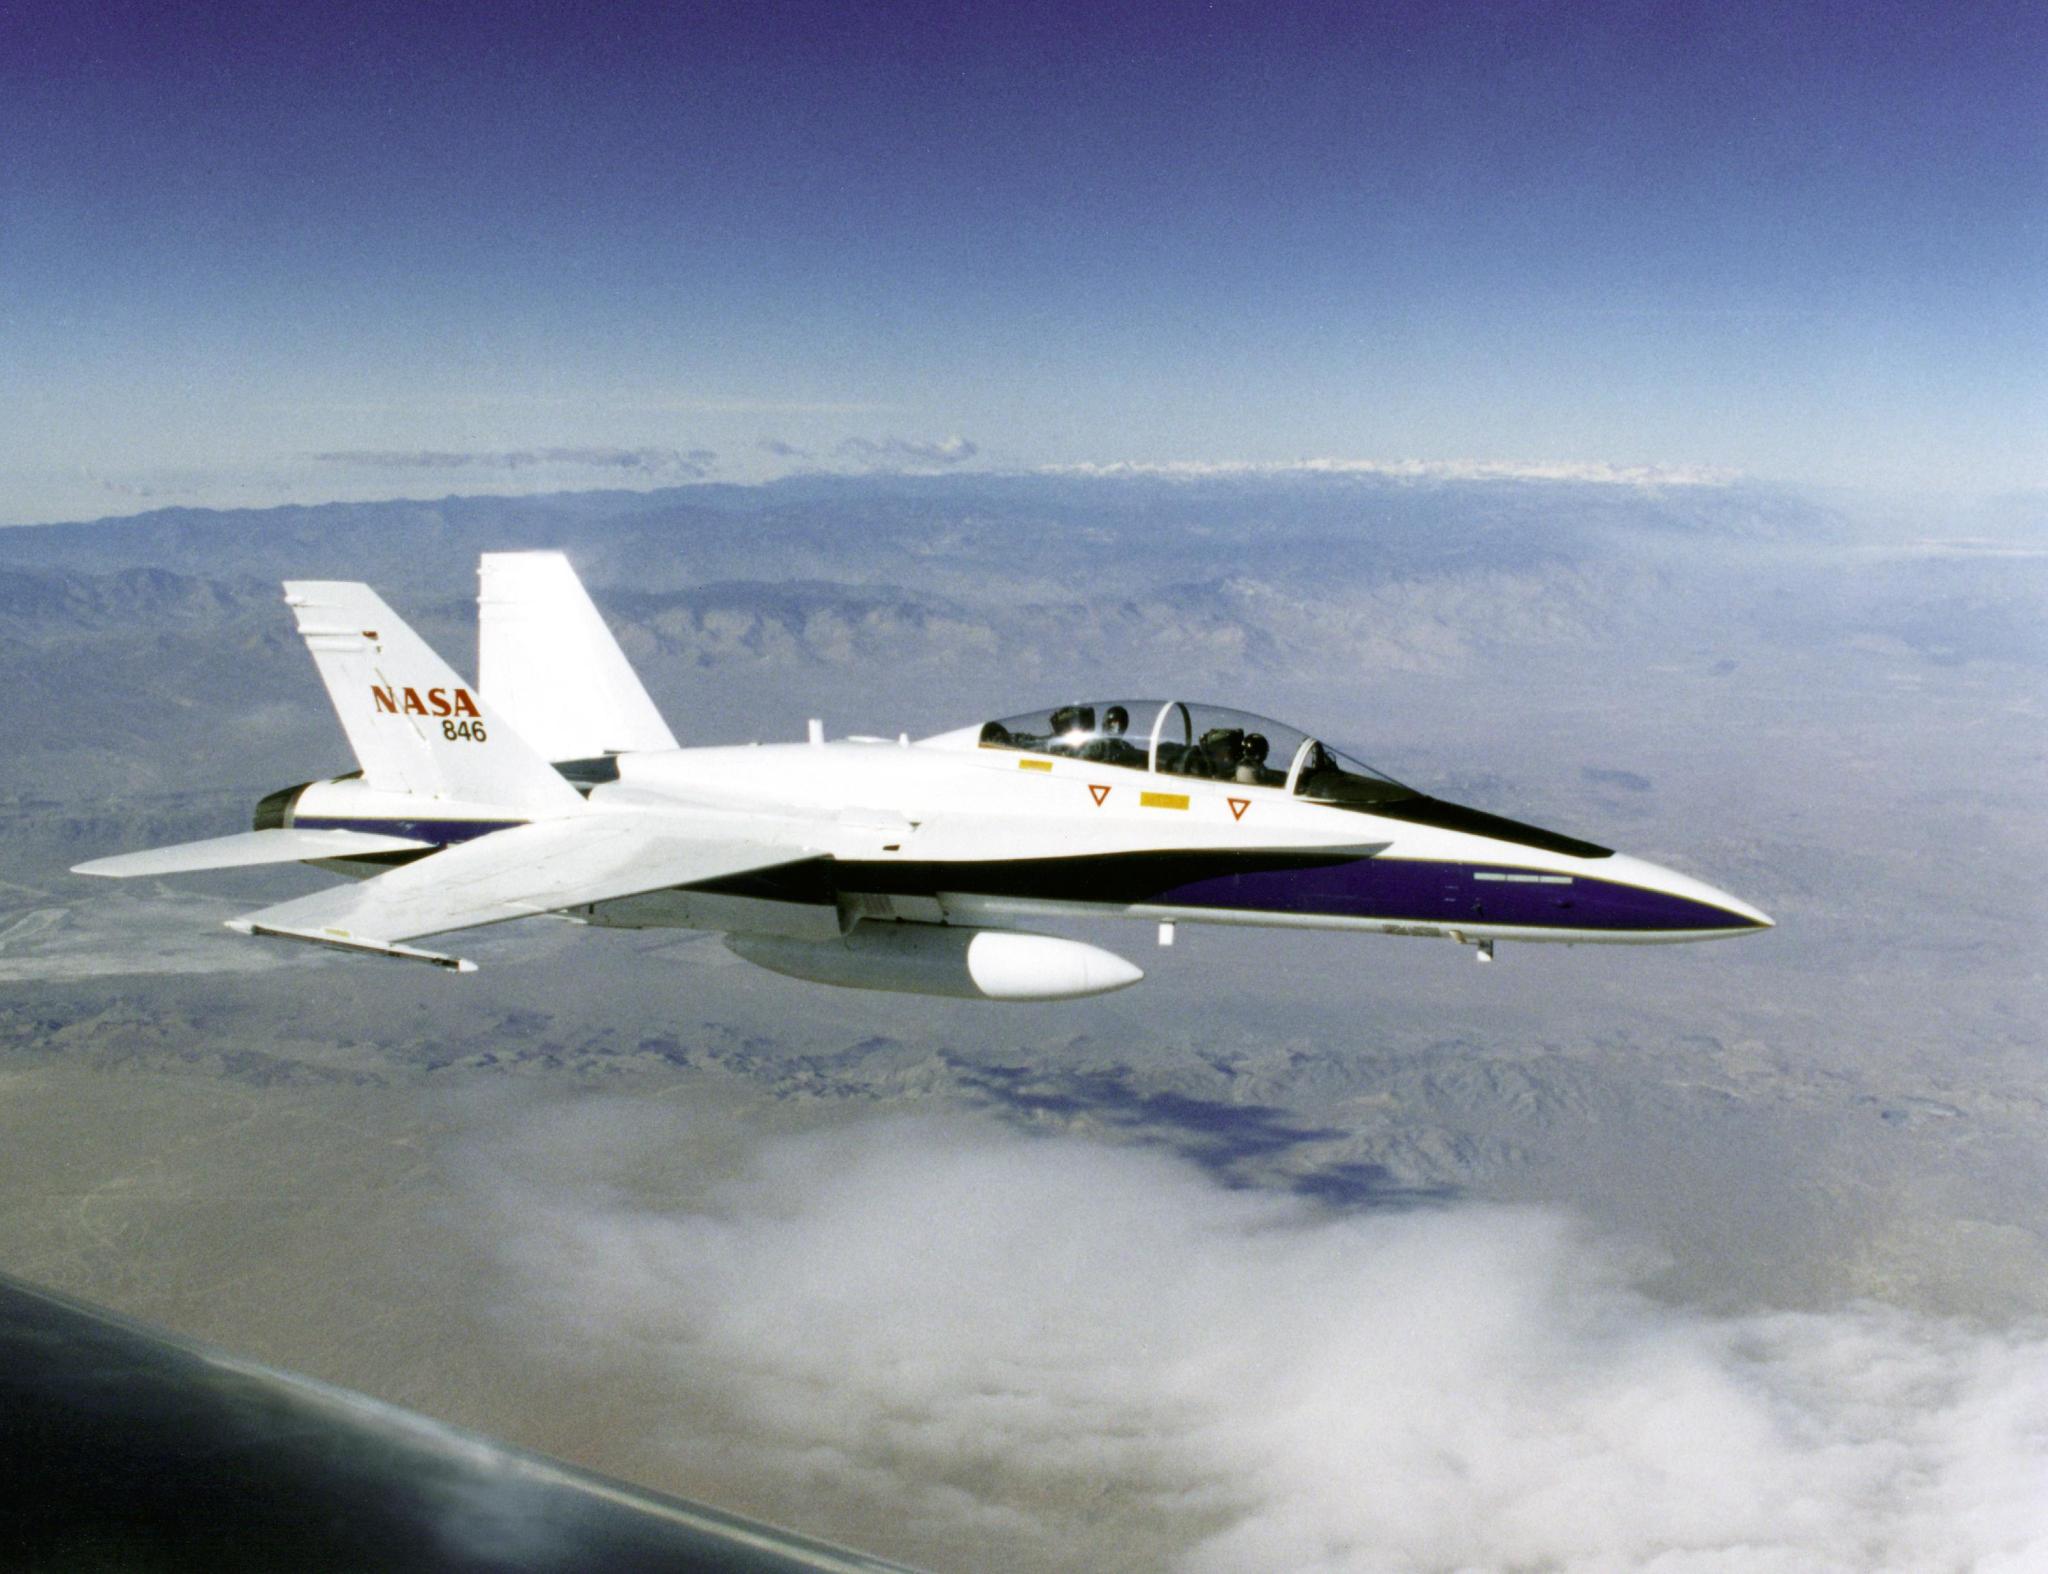 F/A-18B aircraft in flight, used as a safety chase and support aircraft on Dryden research missions.